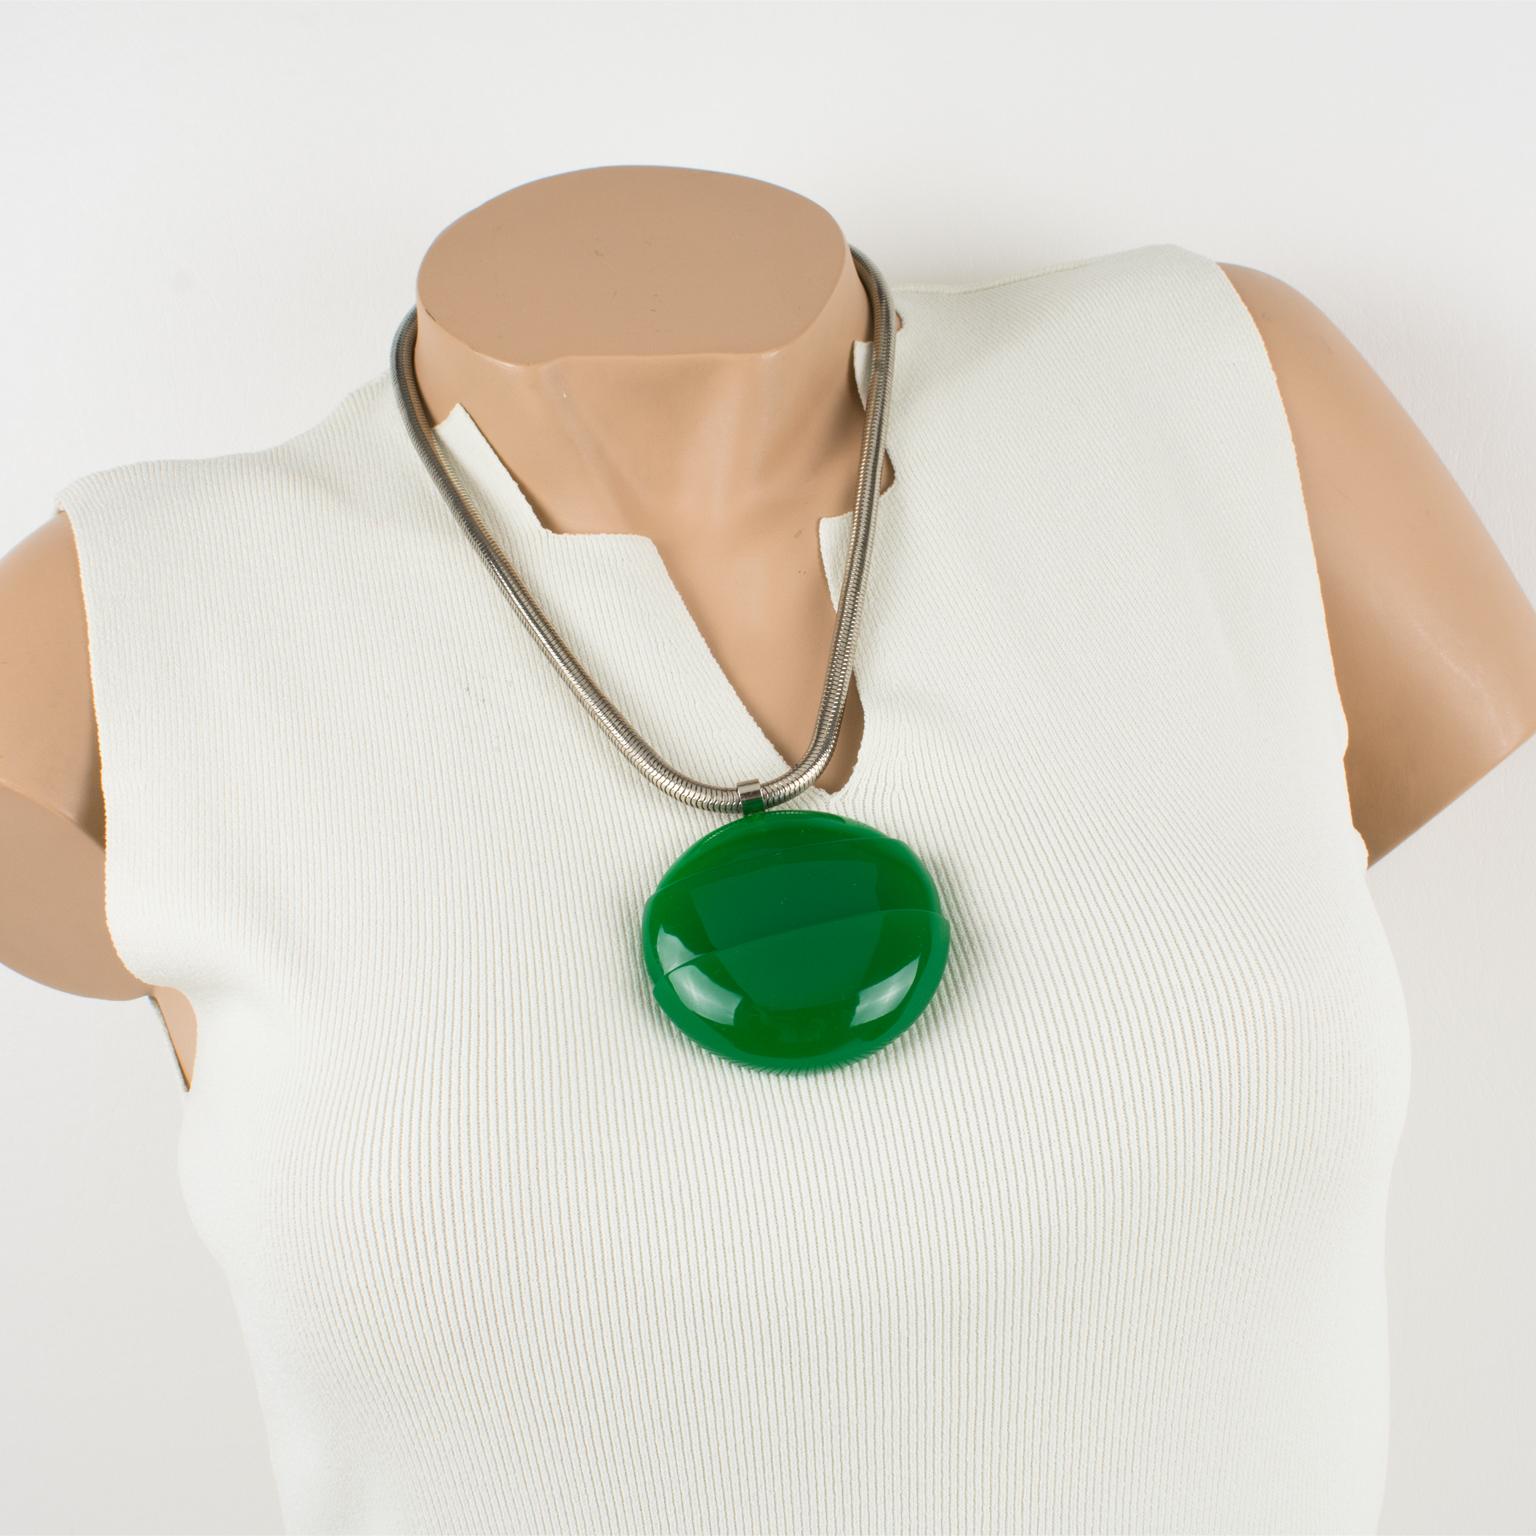 This lovely Lanvin Paris modernist 1970s necklace features an oversized architectural dimensional Lucite pendant in an intense emerald green color. The necklace still has its original silvered metal snake chain with a spring ring-closing clasp. The